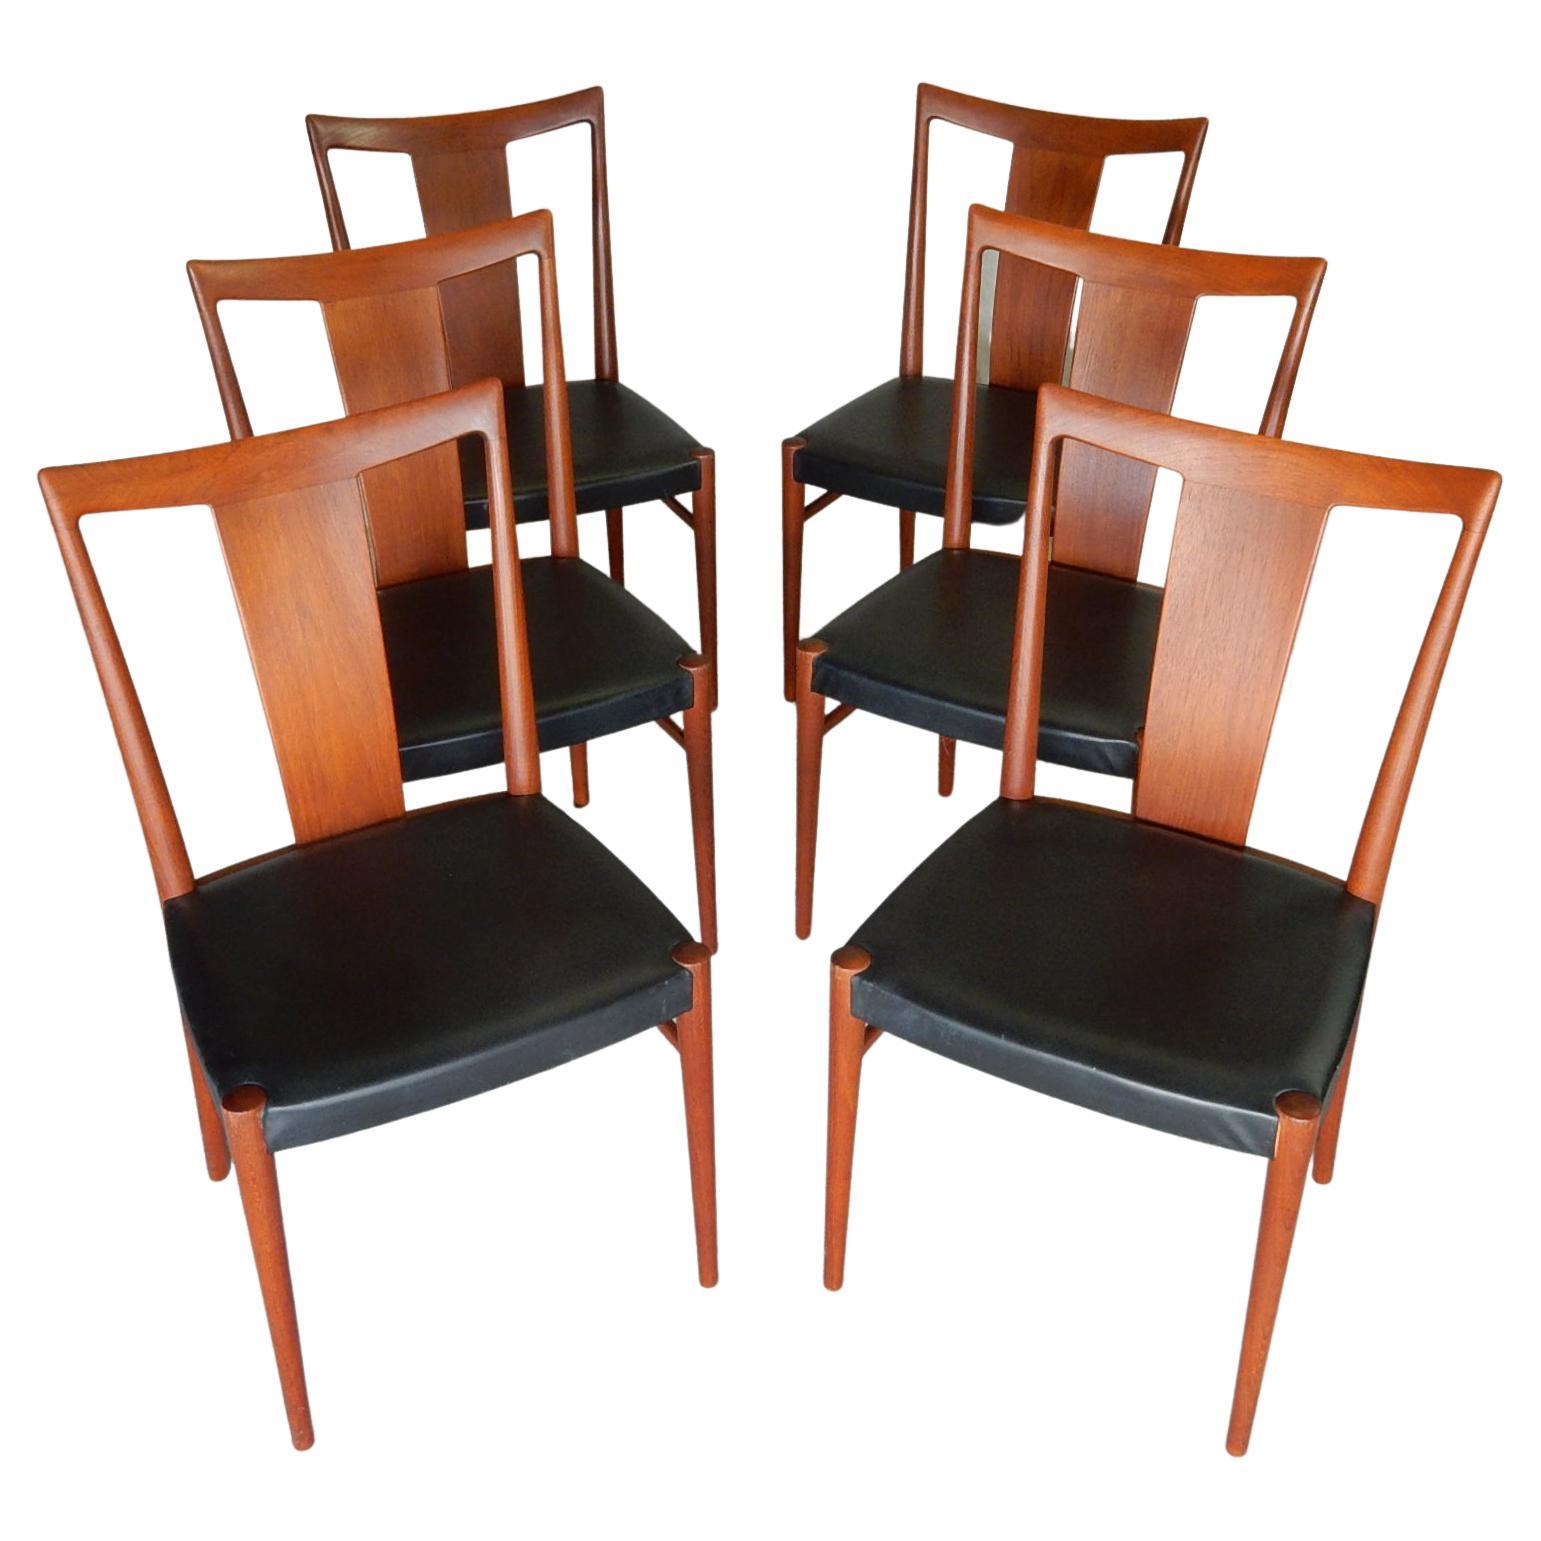 Mid-Century Danish Modern Sculptural Teak Dining Chairs 6 In Good Condition For Sale In Las Vegas, NV